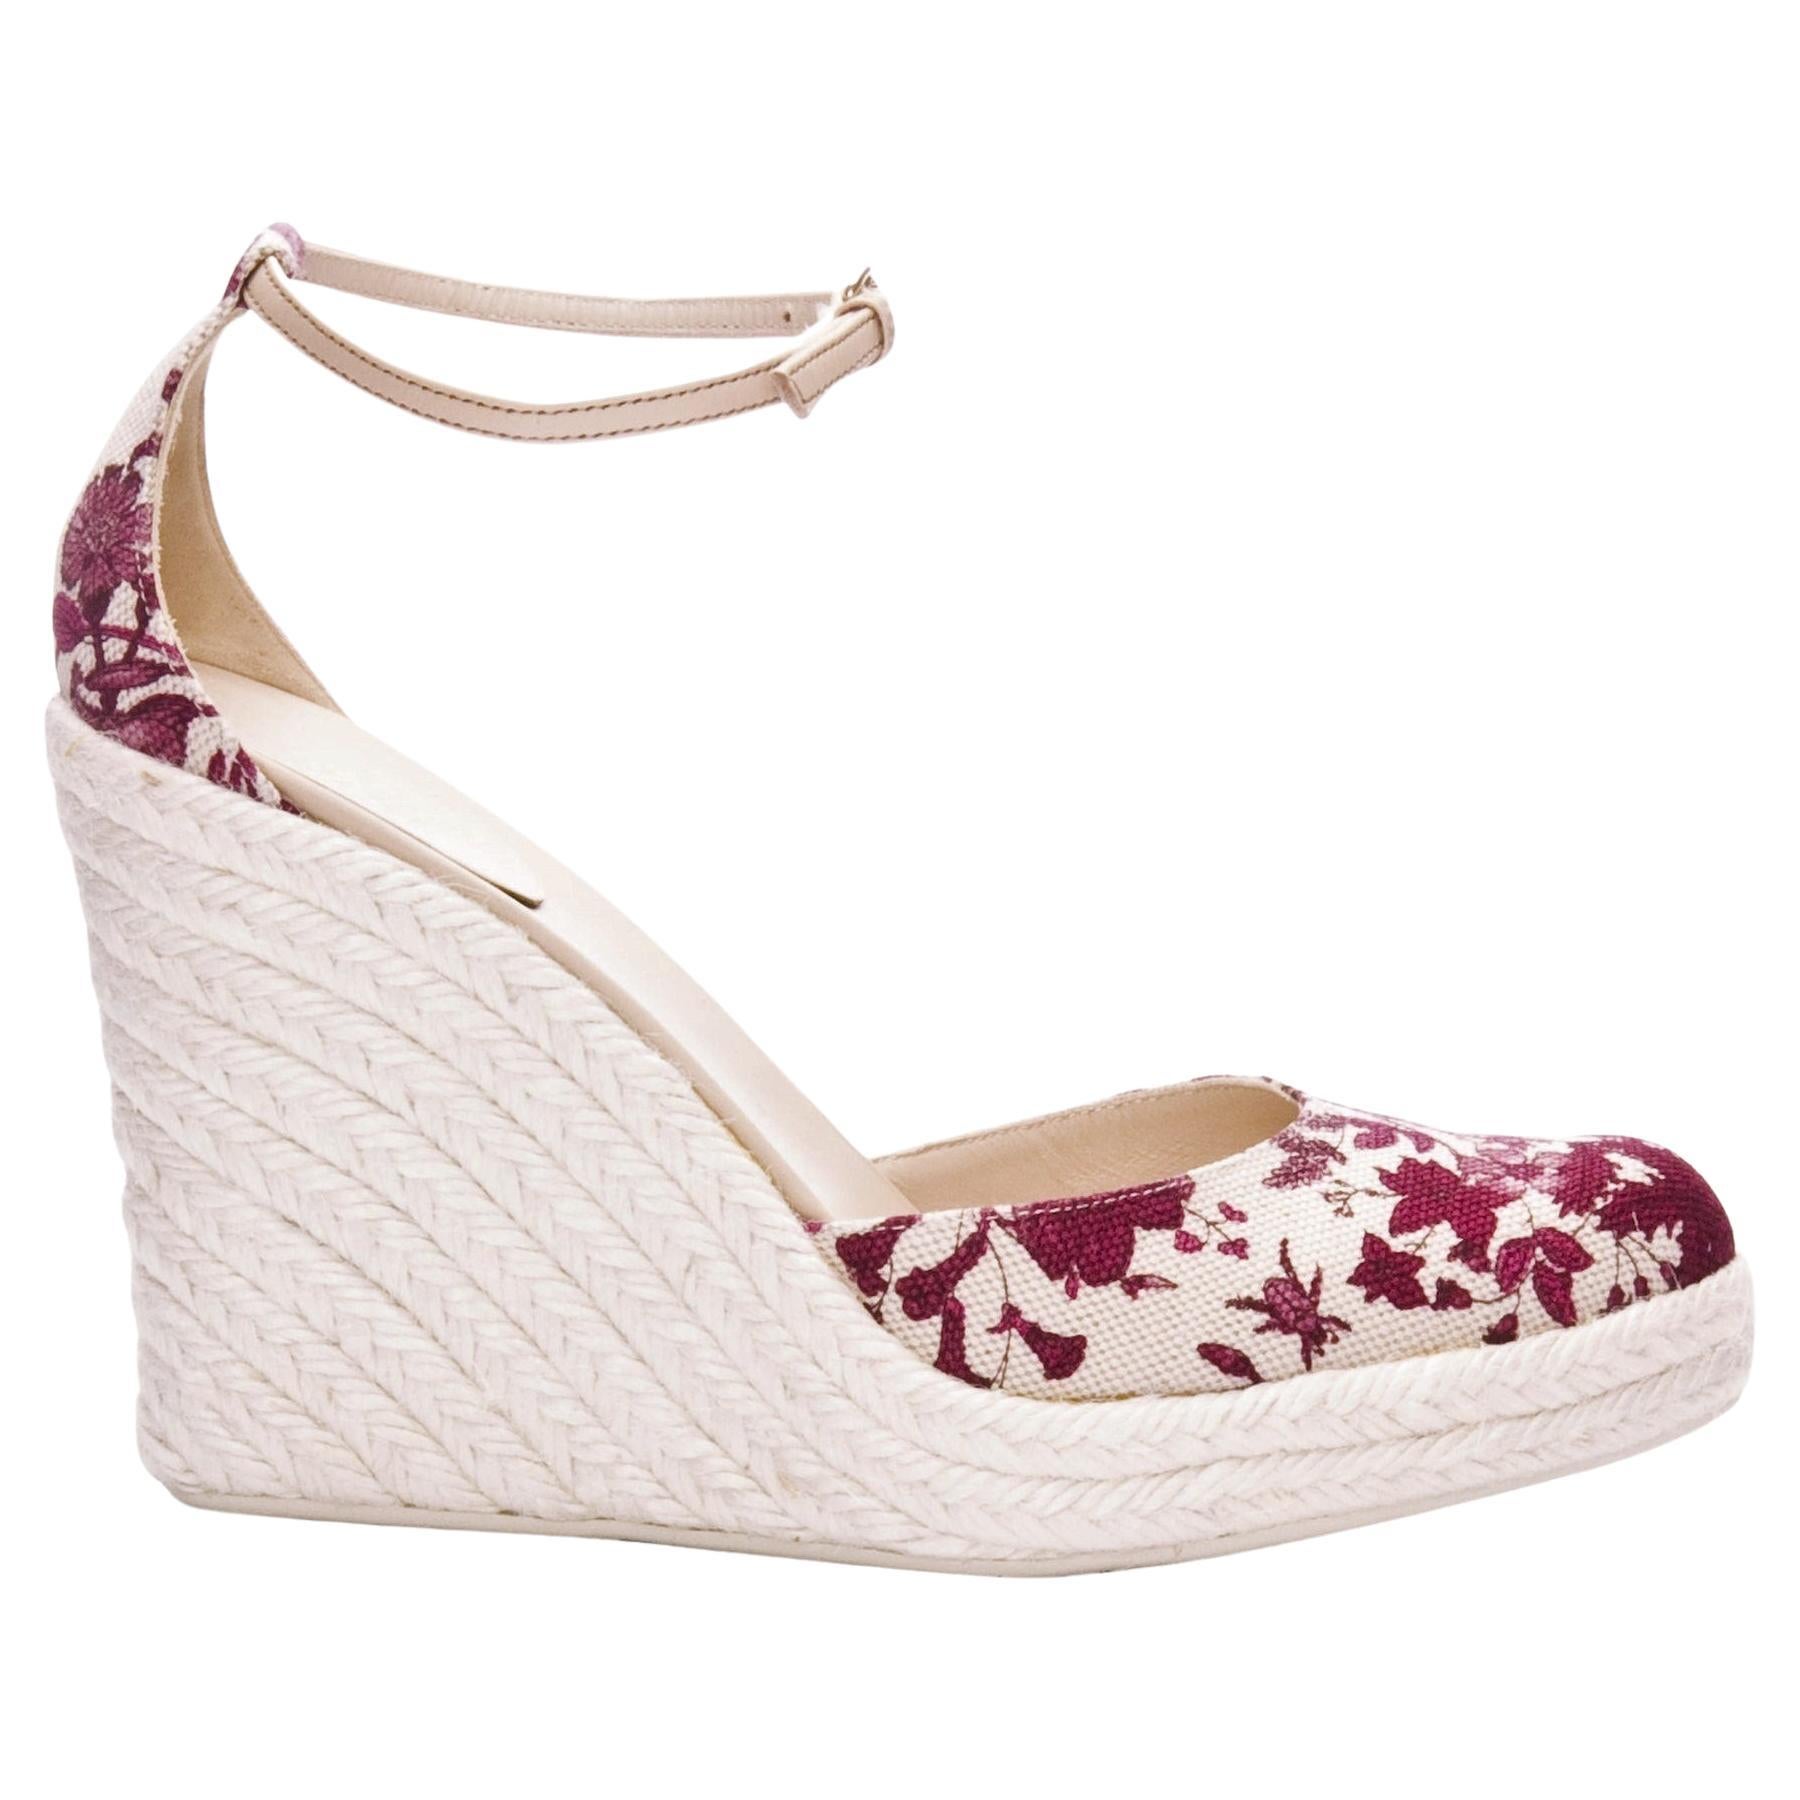 Gucci Cruise New 2007 Runway Flora Wedge Espadrille talons Taille 9 en vente